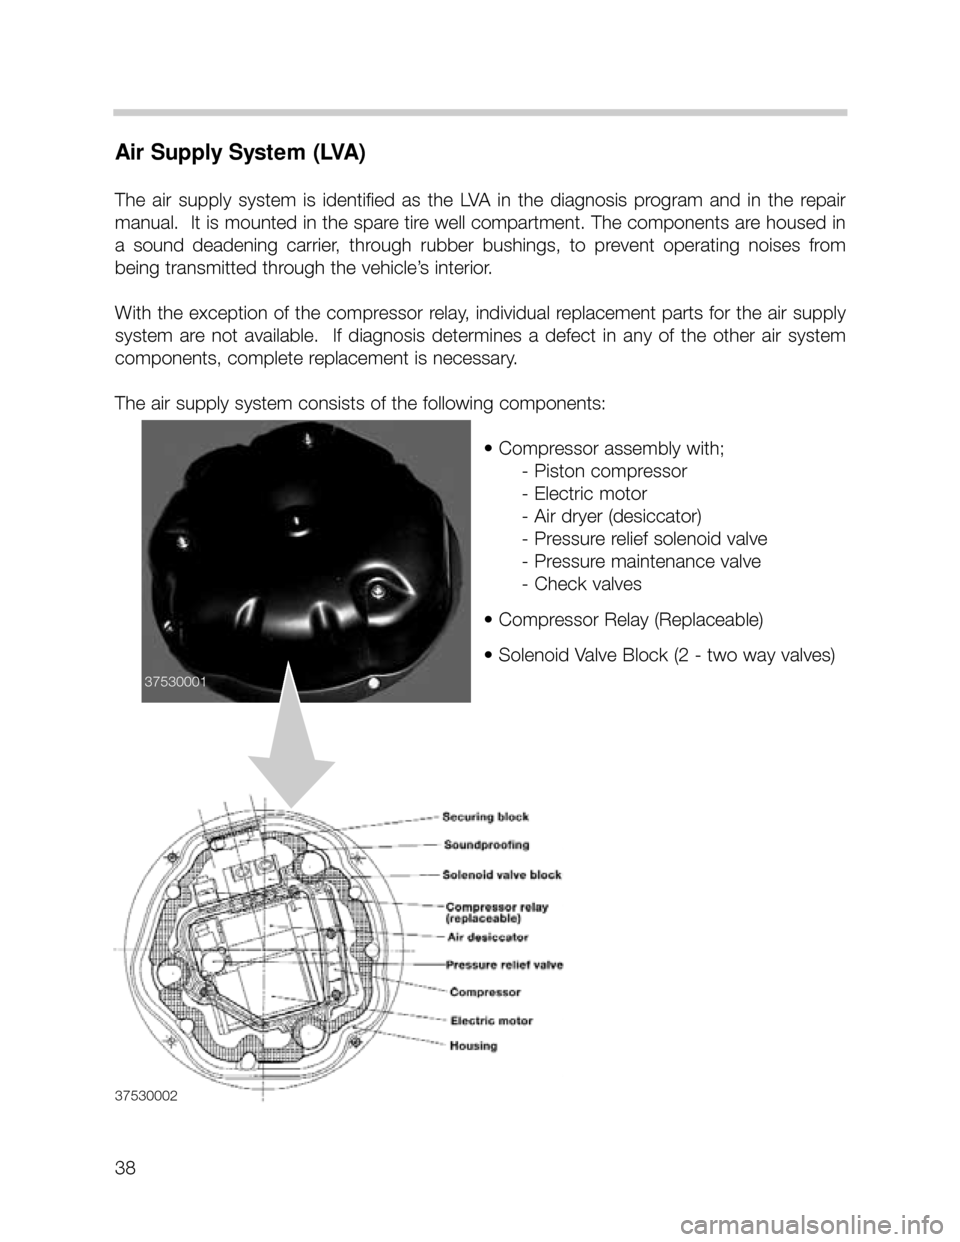 BMW X5 2004 E53 Workshop Manual Air Supply System (LVA)
The  air  supply  system  is  identified  as  the  LVA  in  the  diagnosis  program  and  in  the  repair
manual.  It is mounted in the spare tire well compartment. The compone